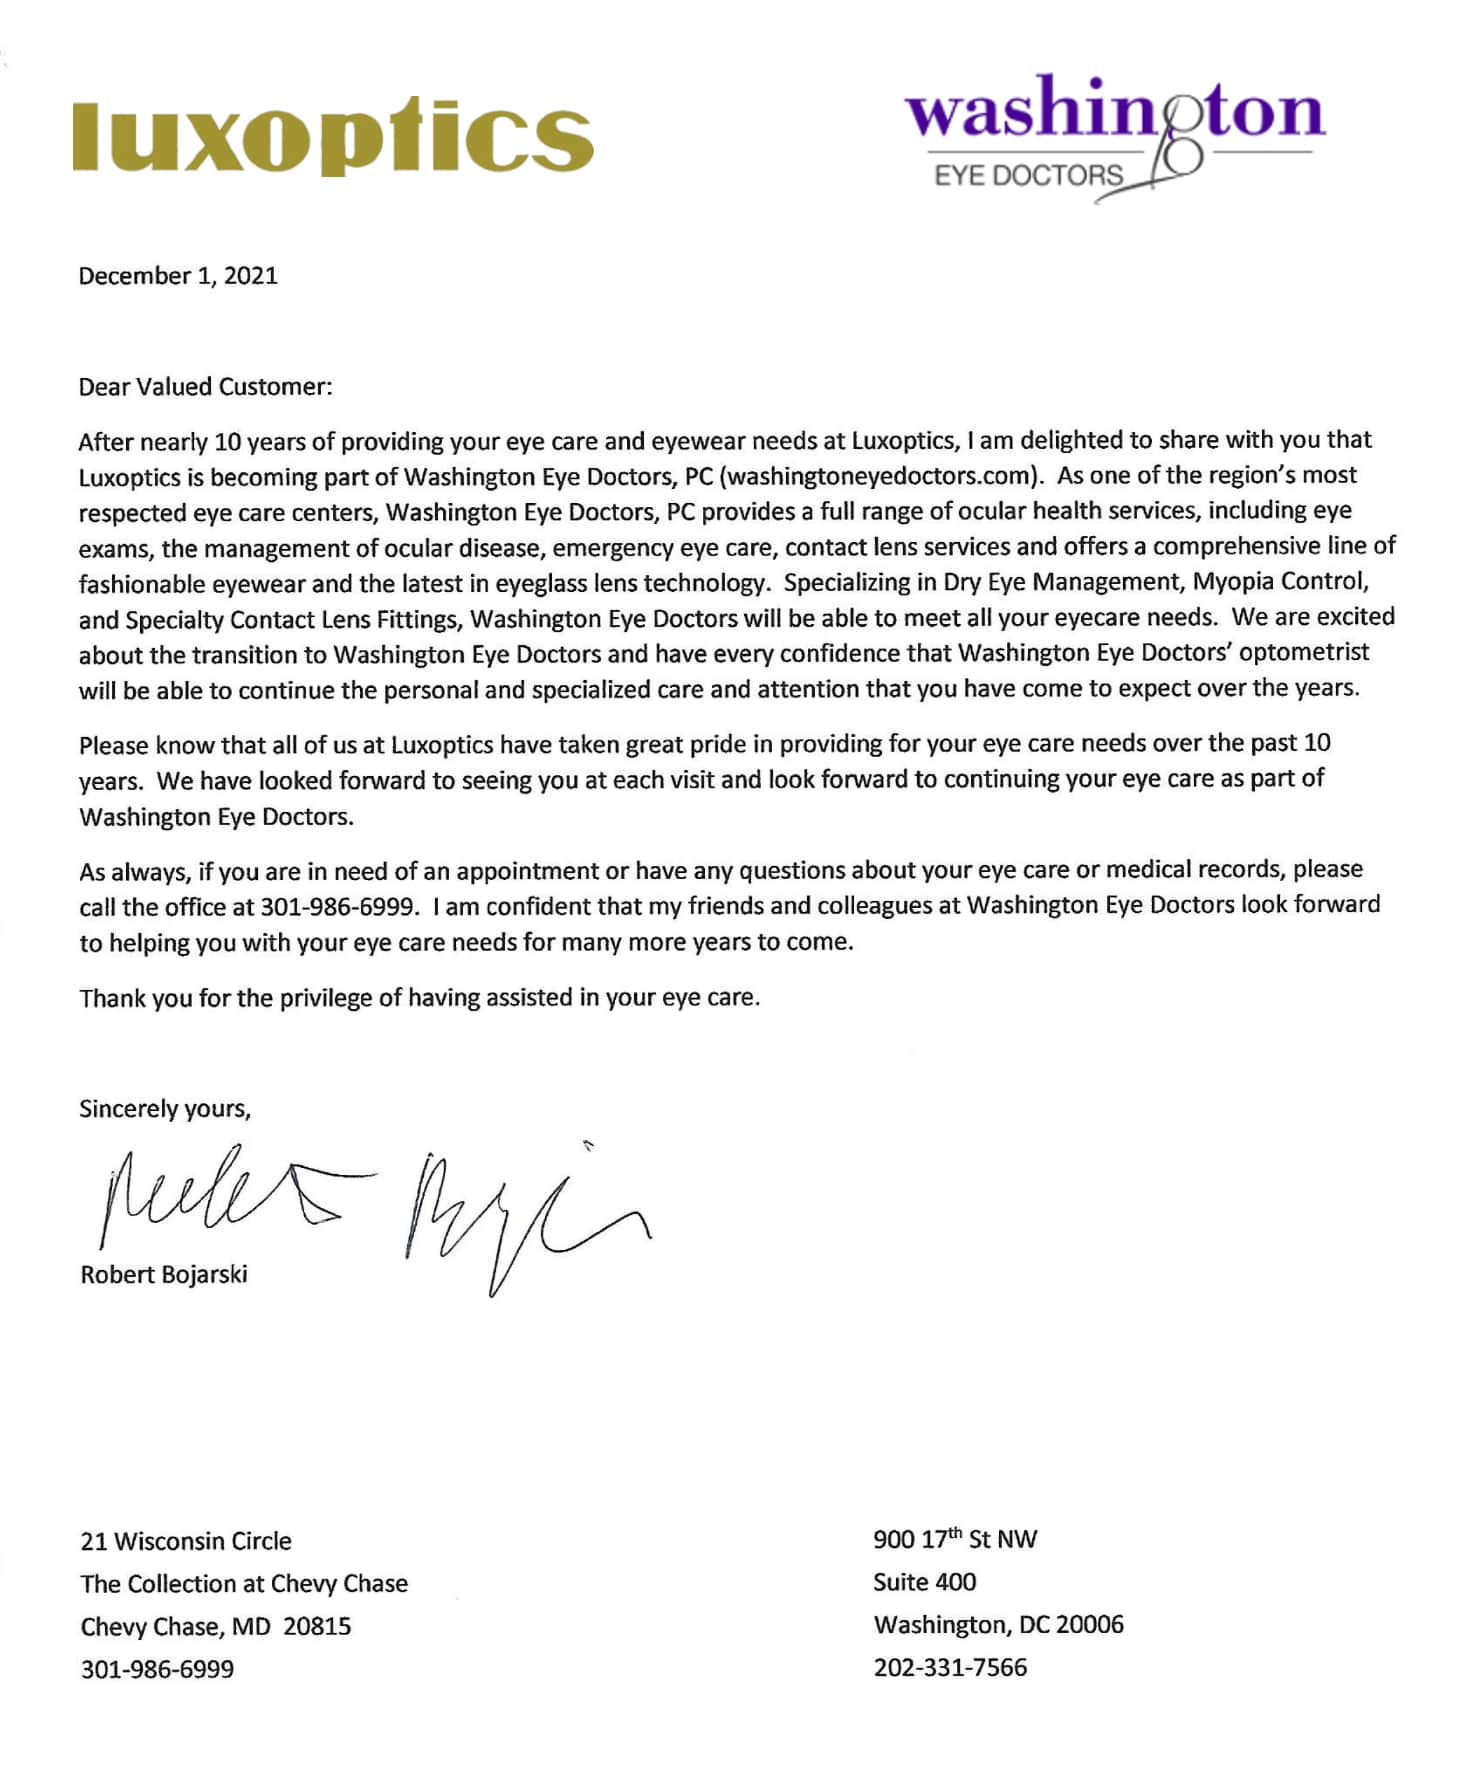 lux optics letter cropped